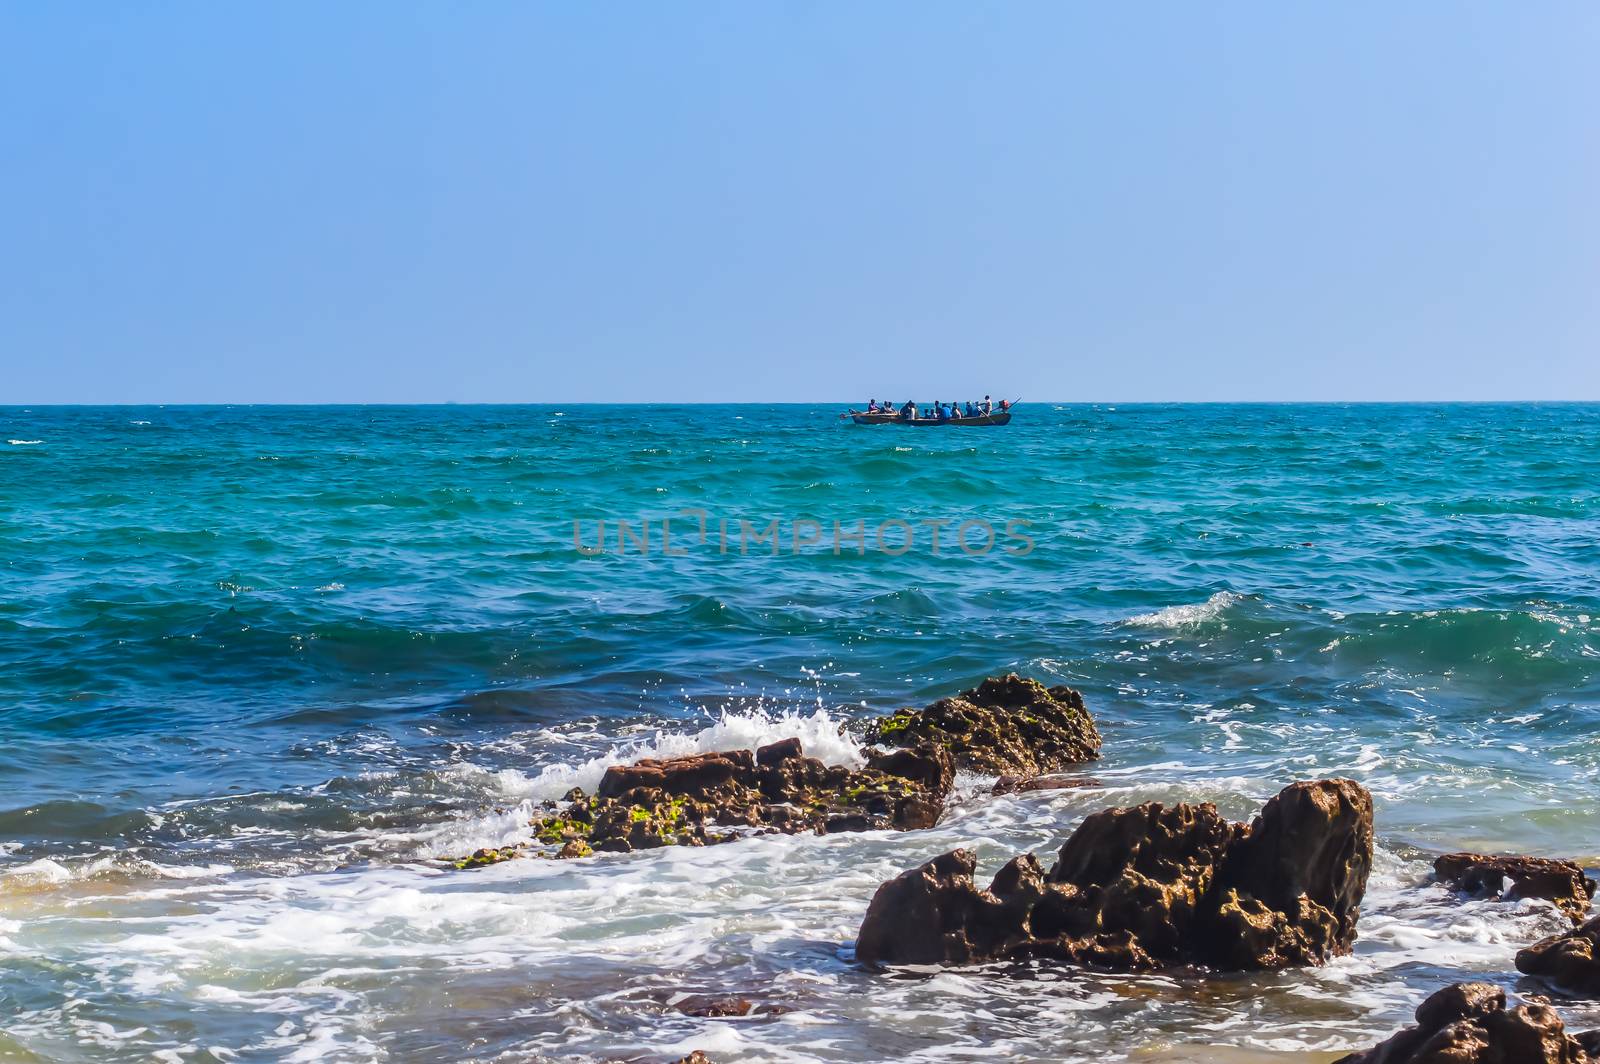 Photograph of Rowing Boat in Sea taken from a distance by sudiptabhowmick